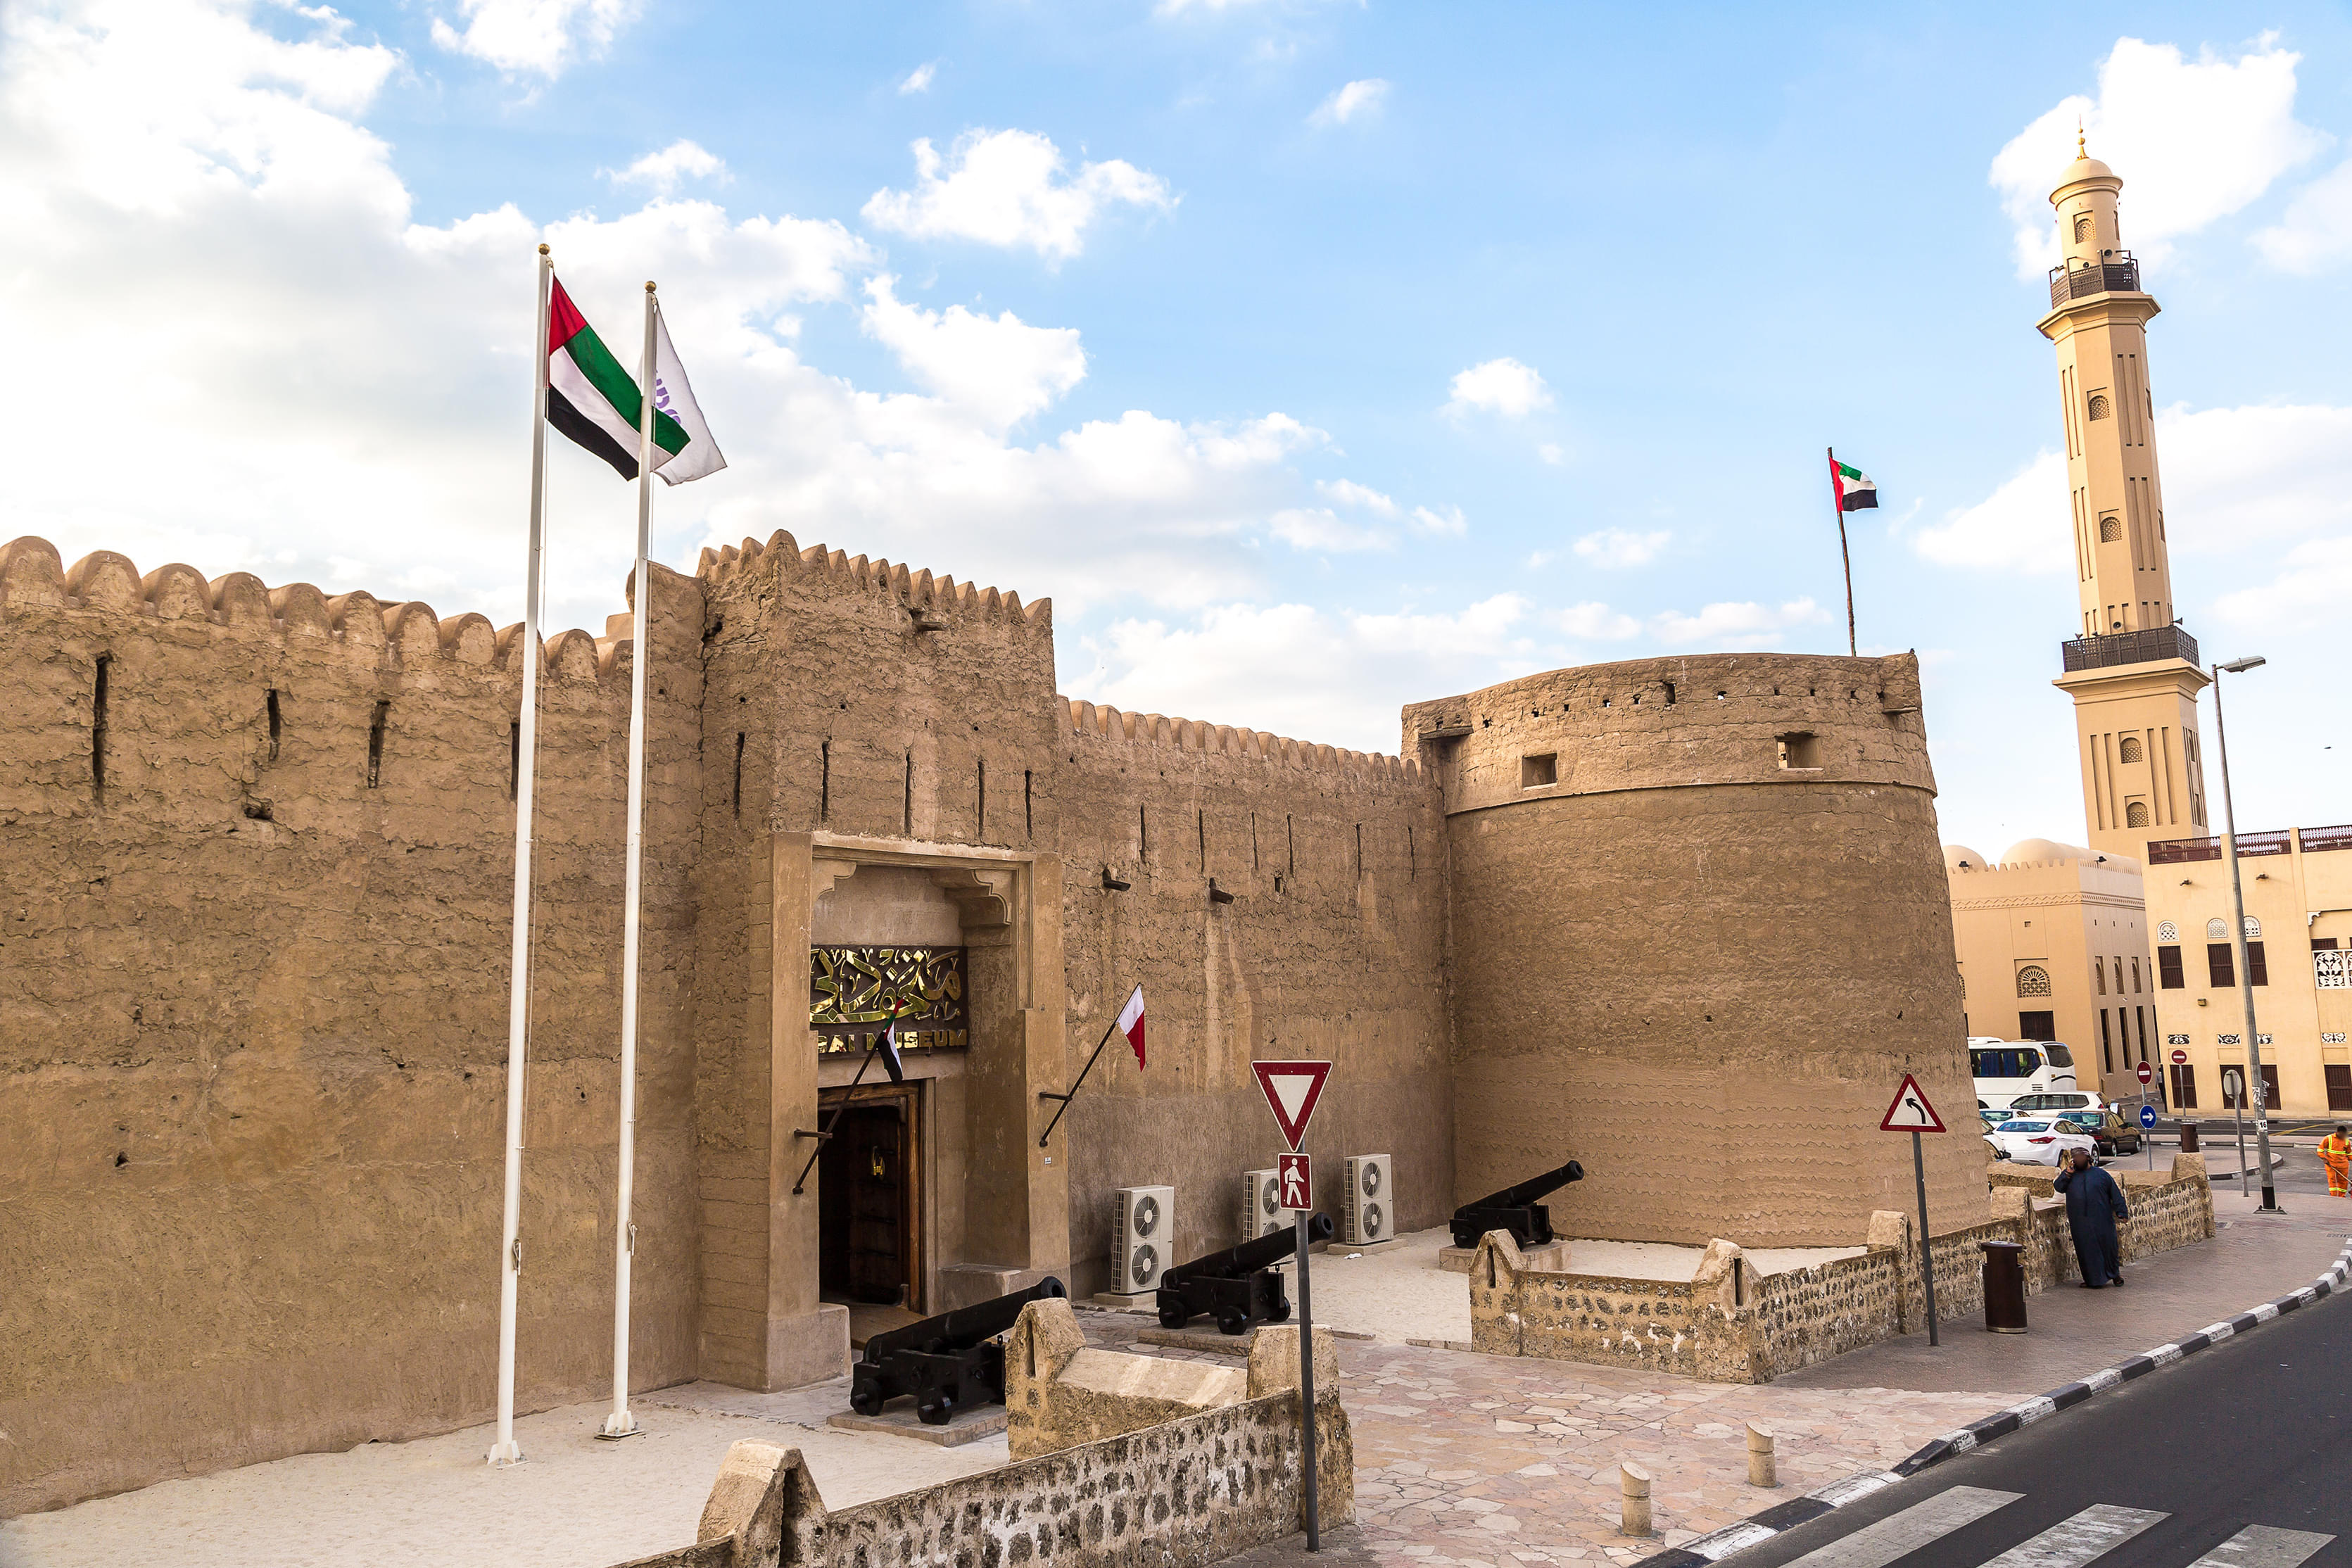 A visit to The Dubai Museum